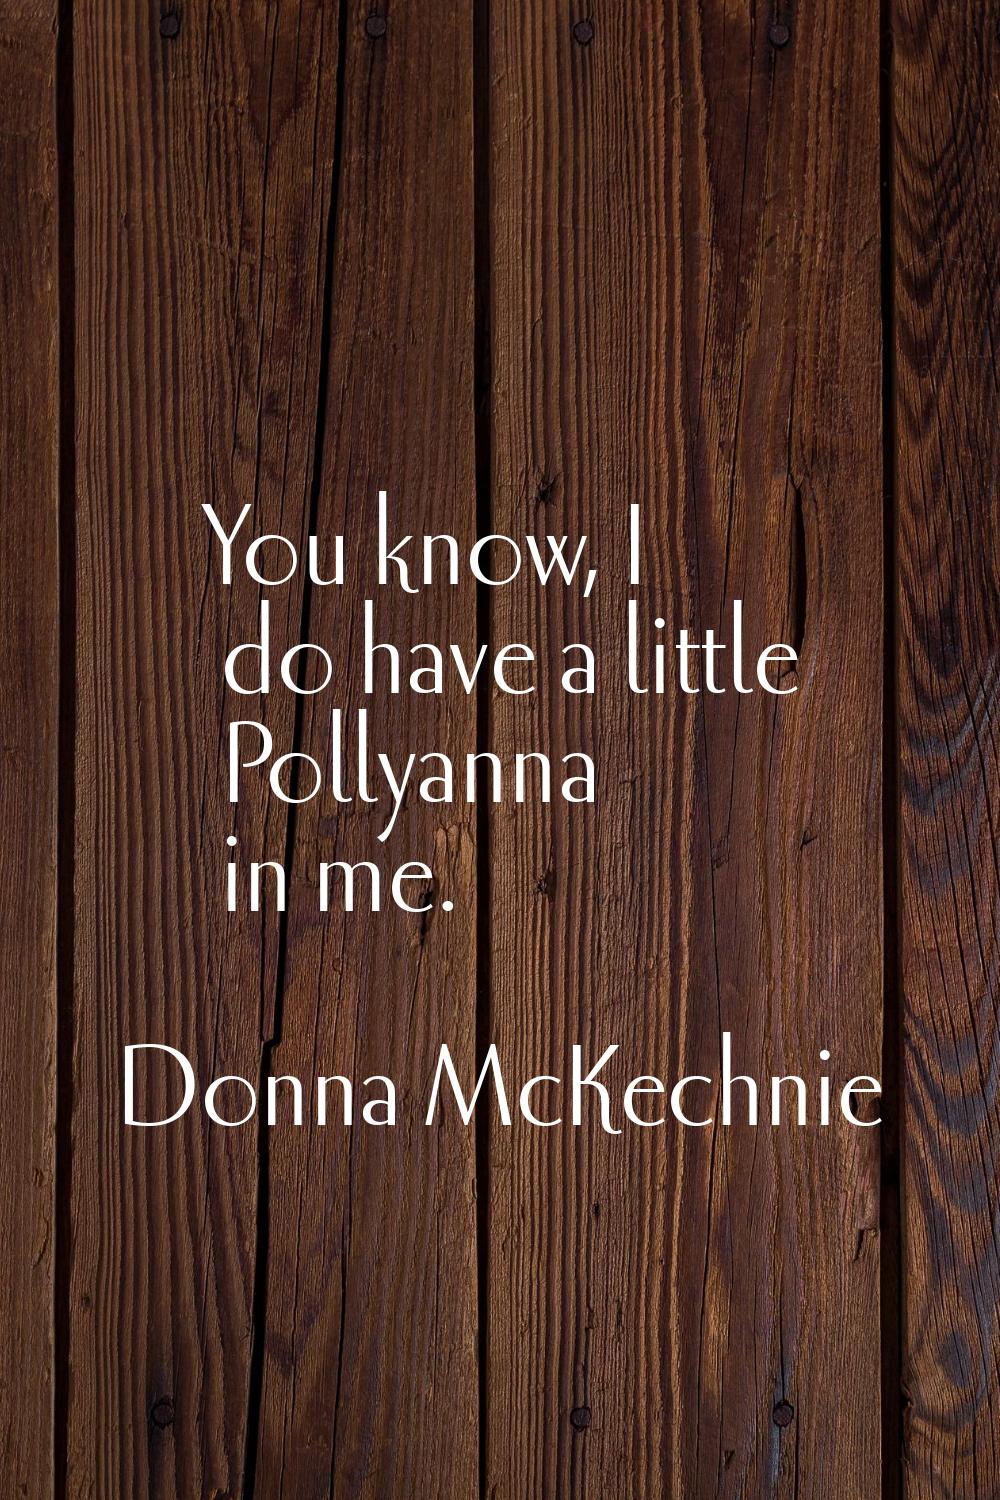 You know, I do have a little Pollyanna in me.